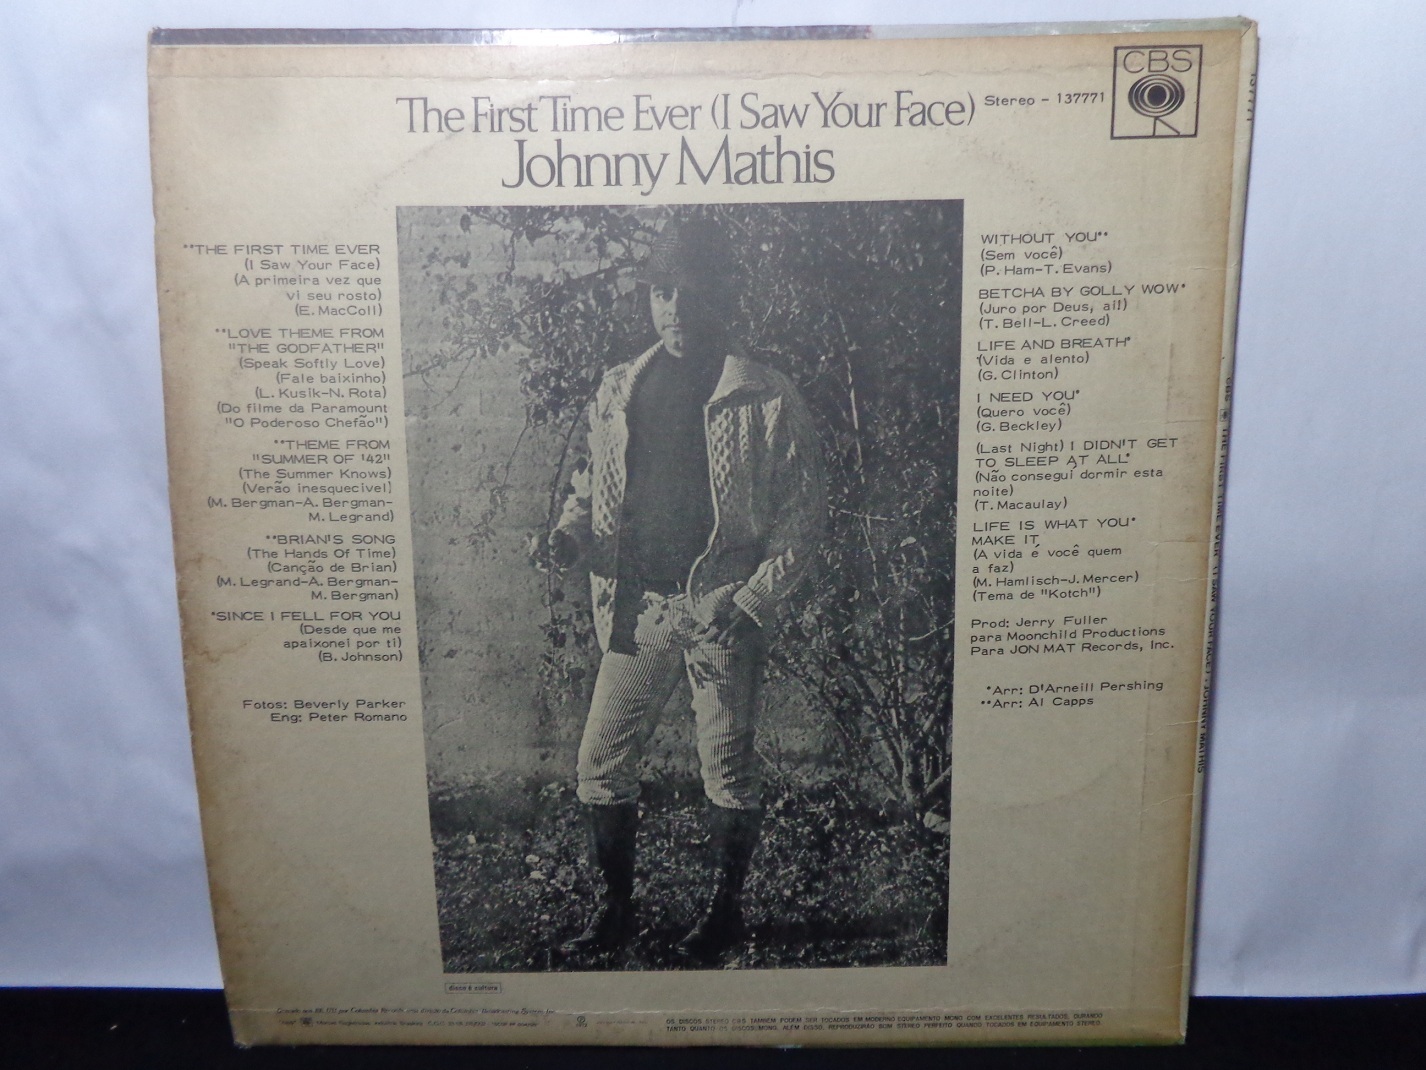 Vinil - Johnny Mathis - The First Time Ever (I Saw Your Face)